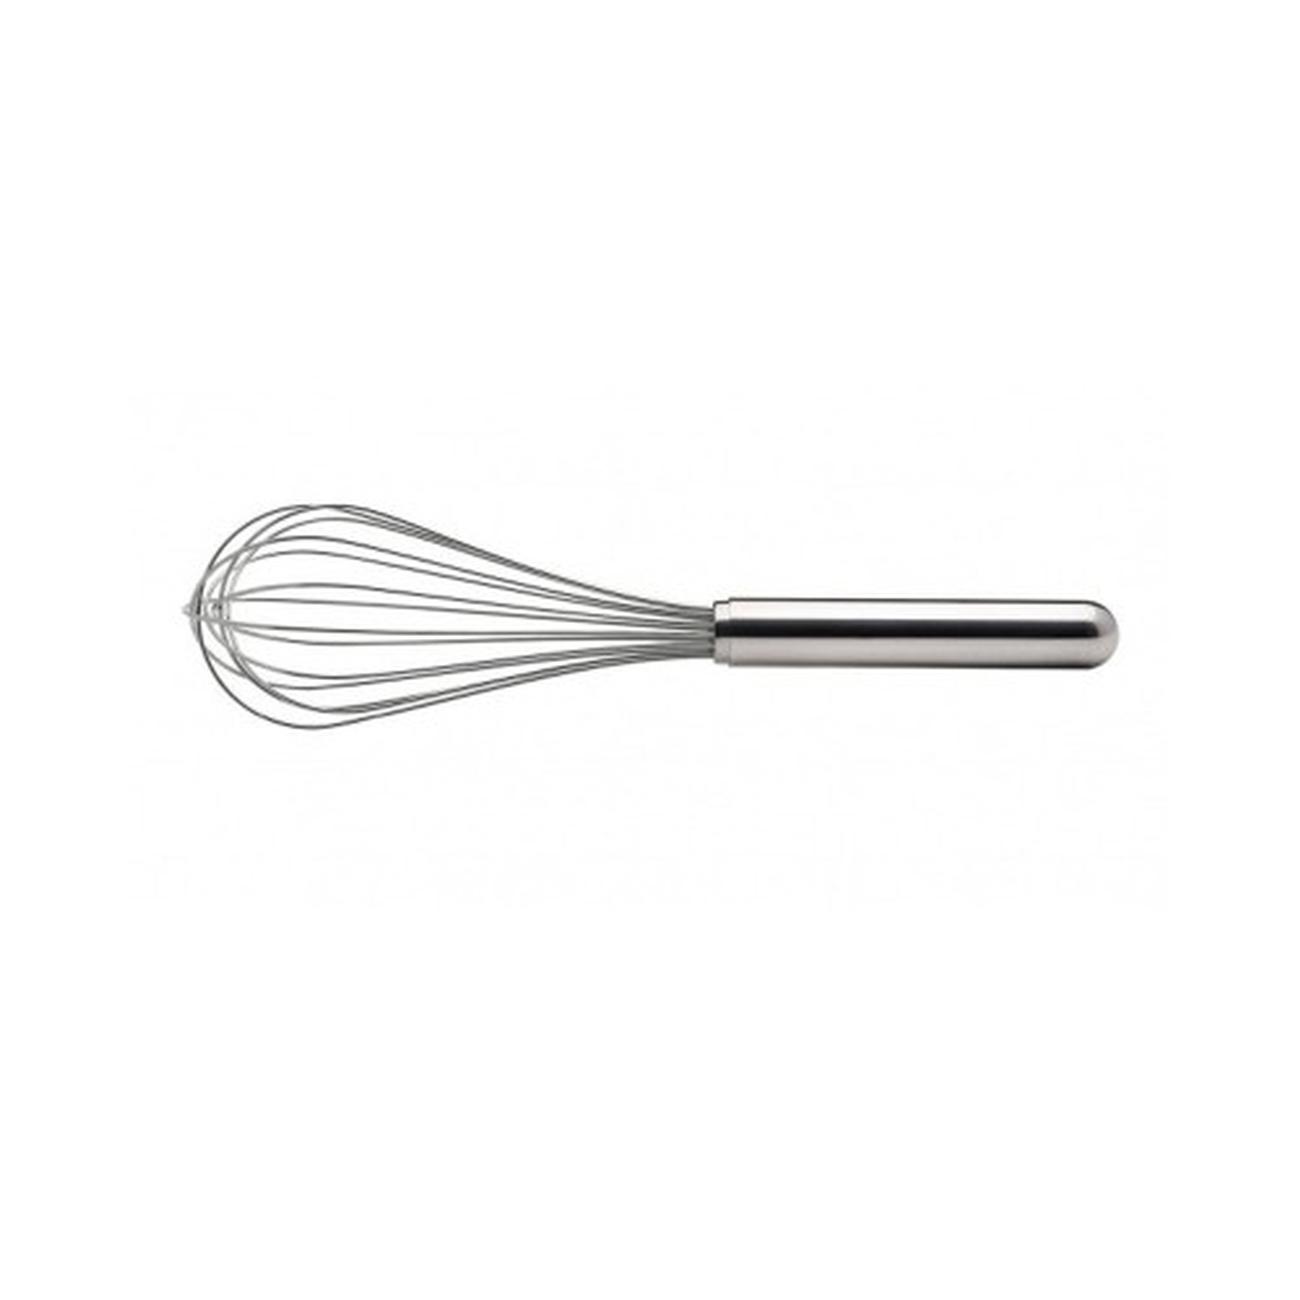 weis-ss-whisk-round-handle-25cm - Weis Stainless Steel Whisk with Rounded Tubular Handle 25 cm